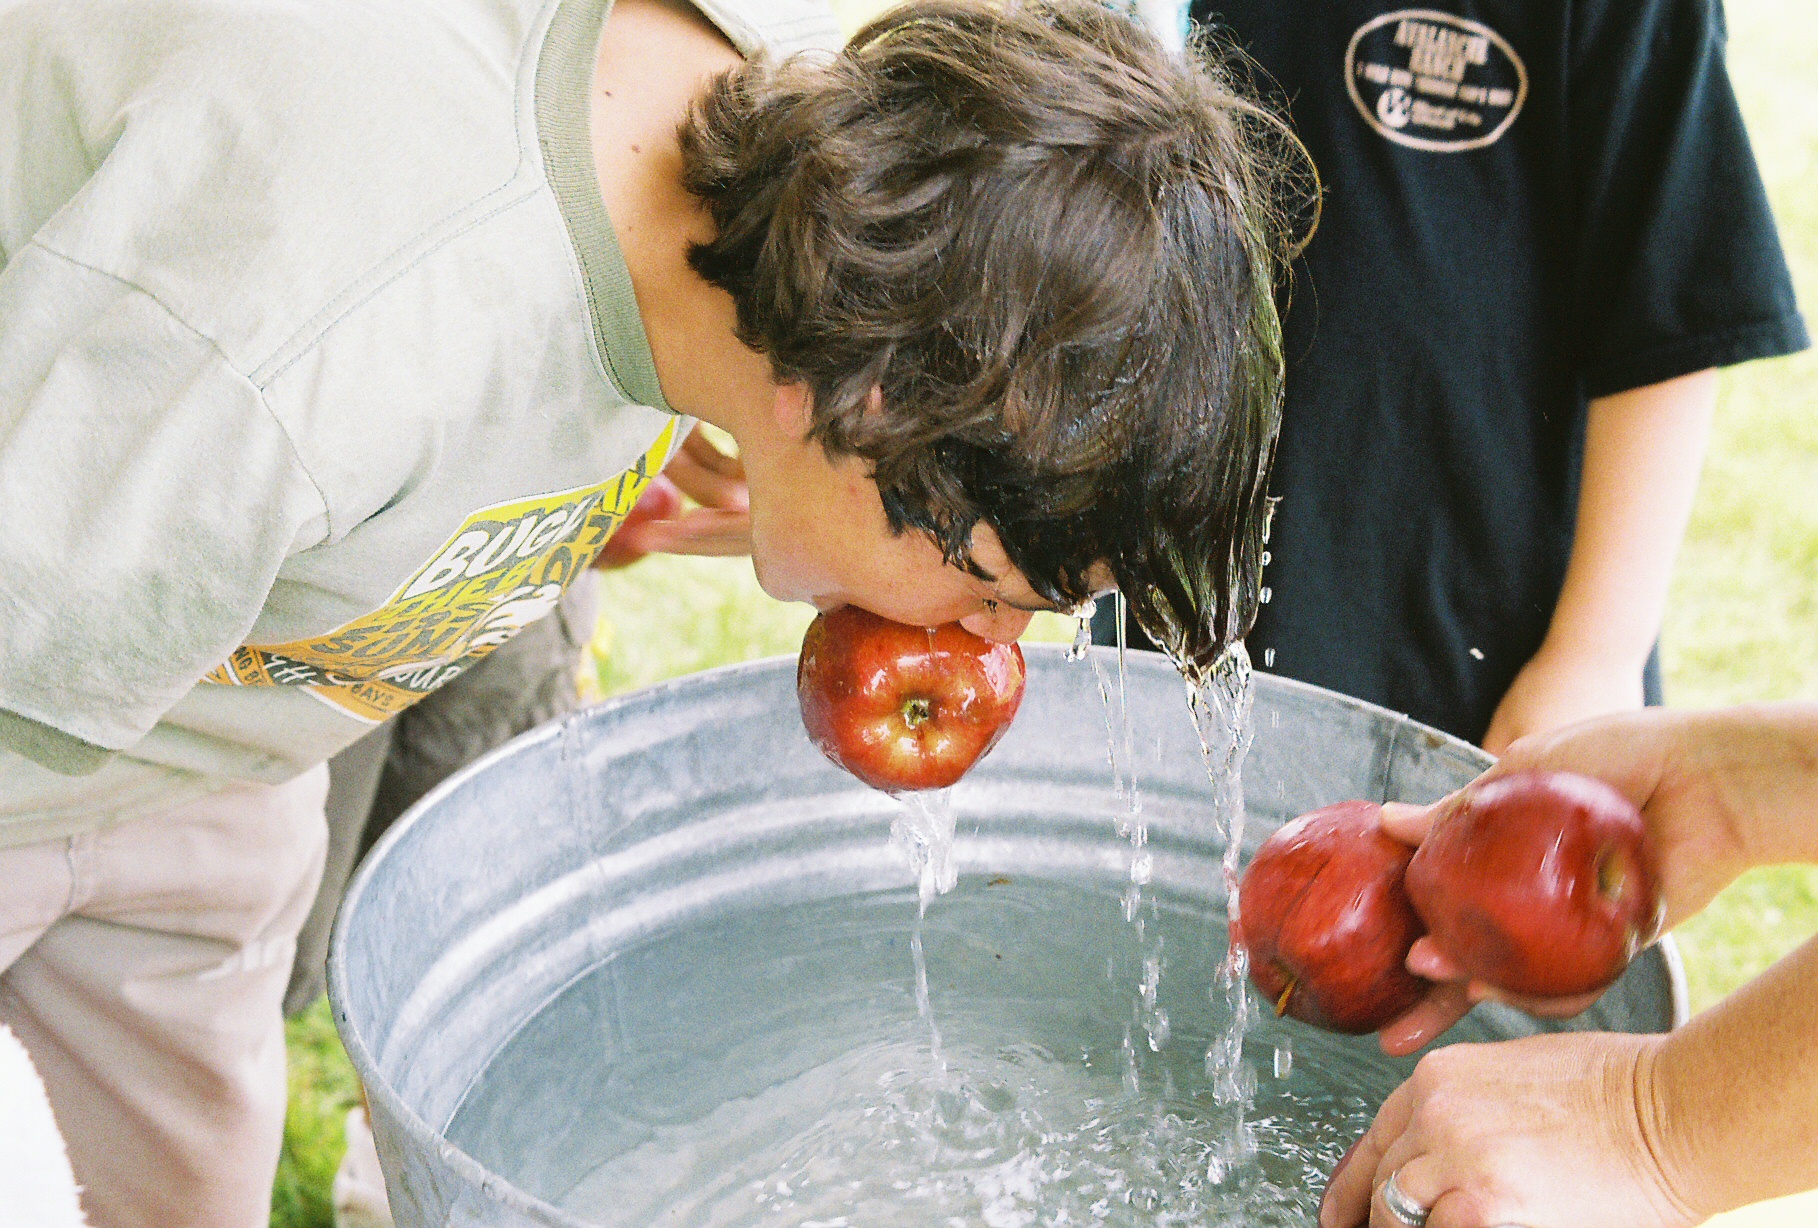 do all apples float in water and are there certain types of apples used for bobbing on halloween